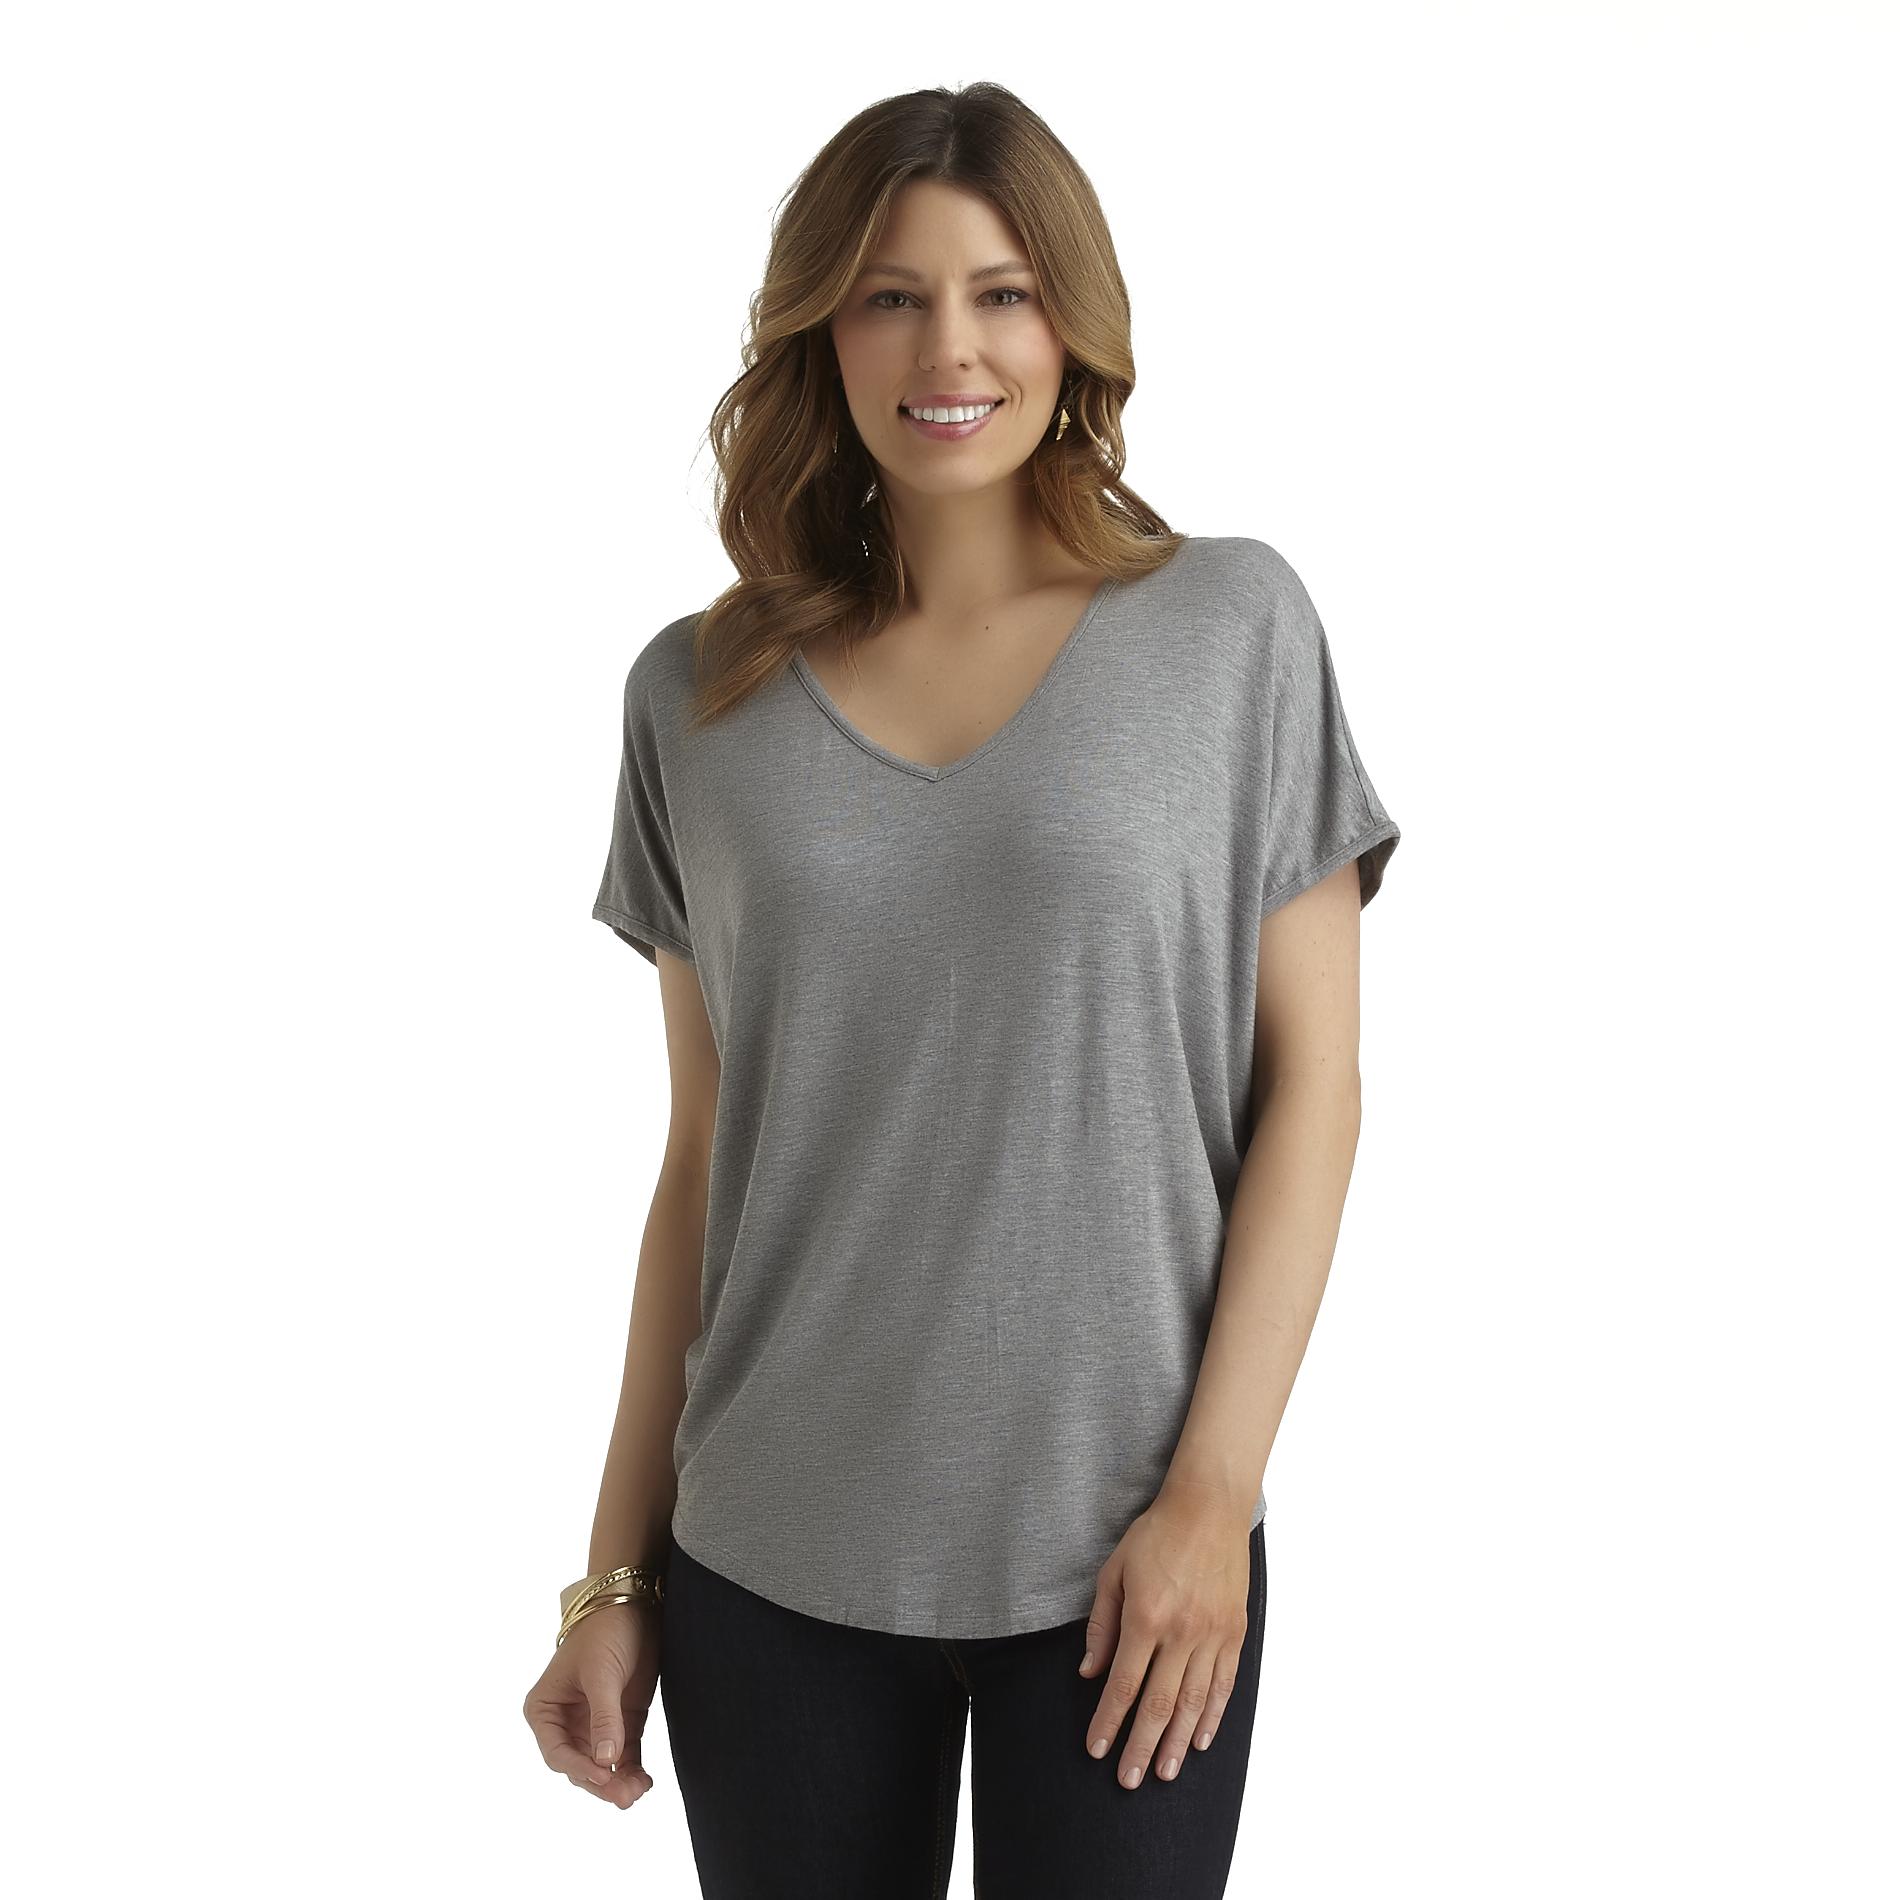 Now + Here Women's V-Neck Stretch Top